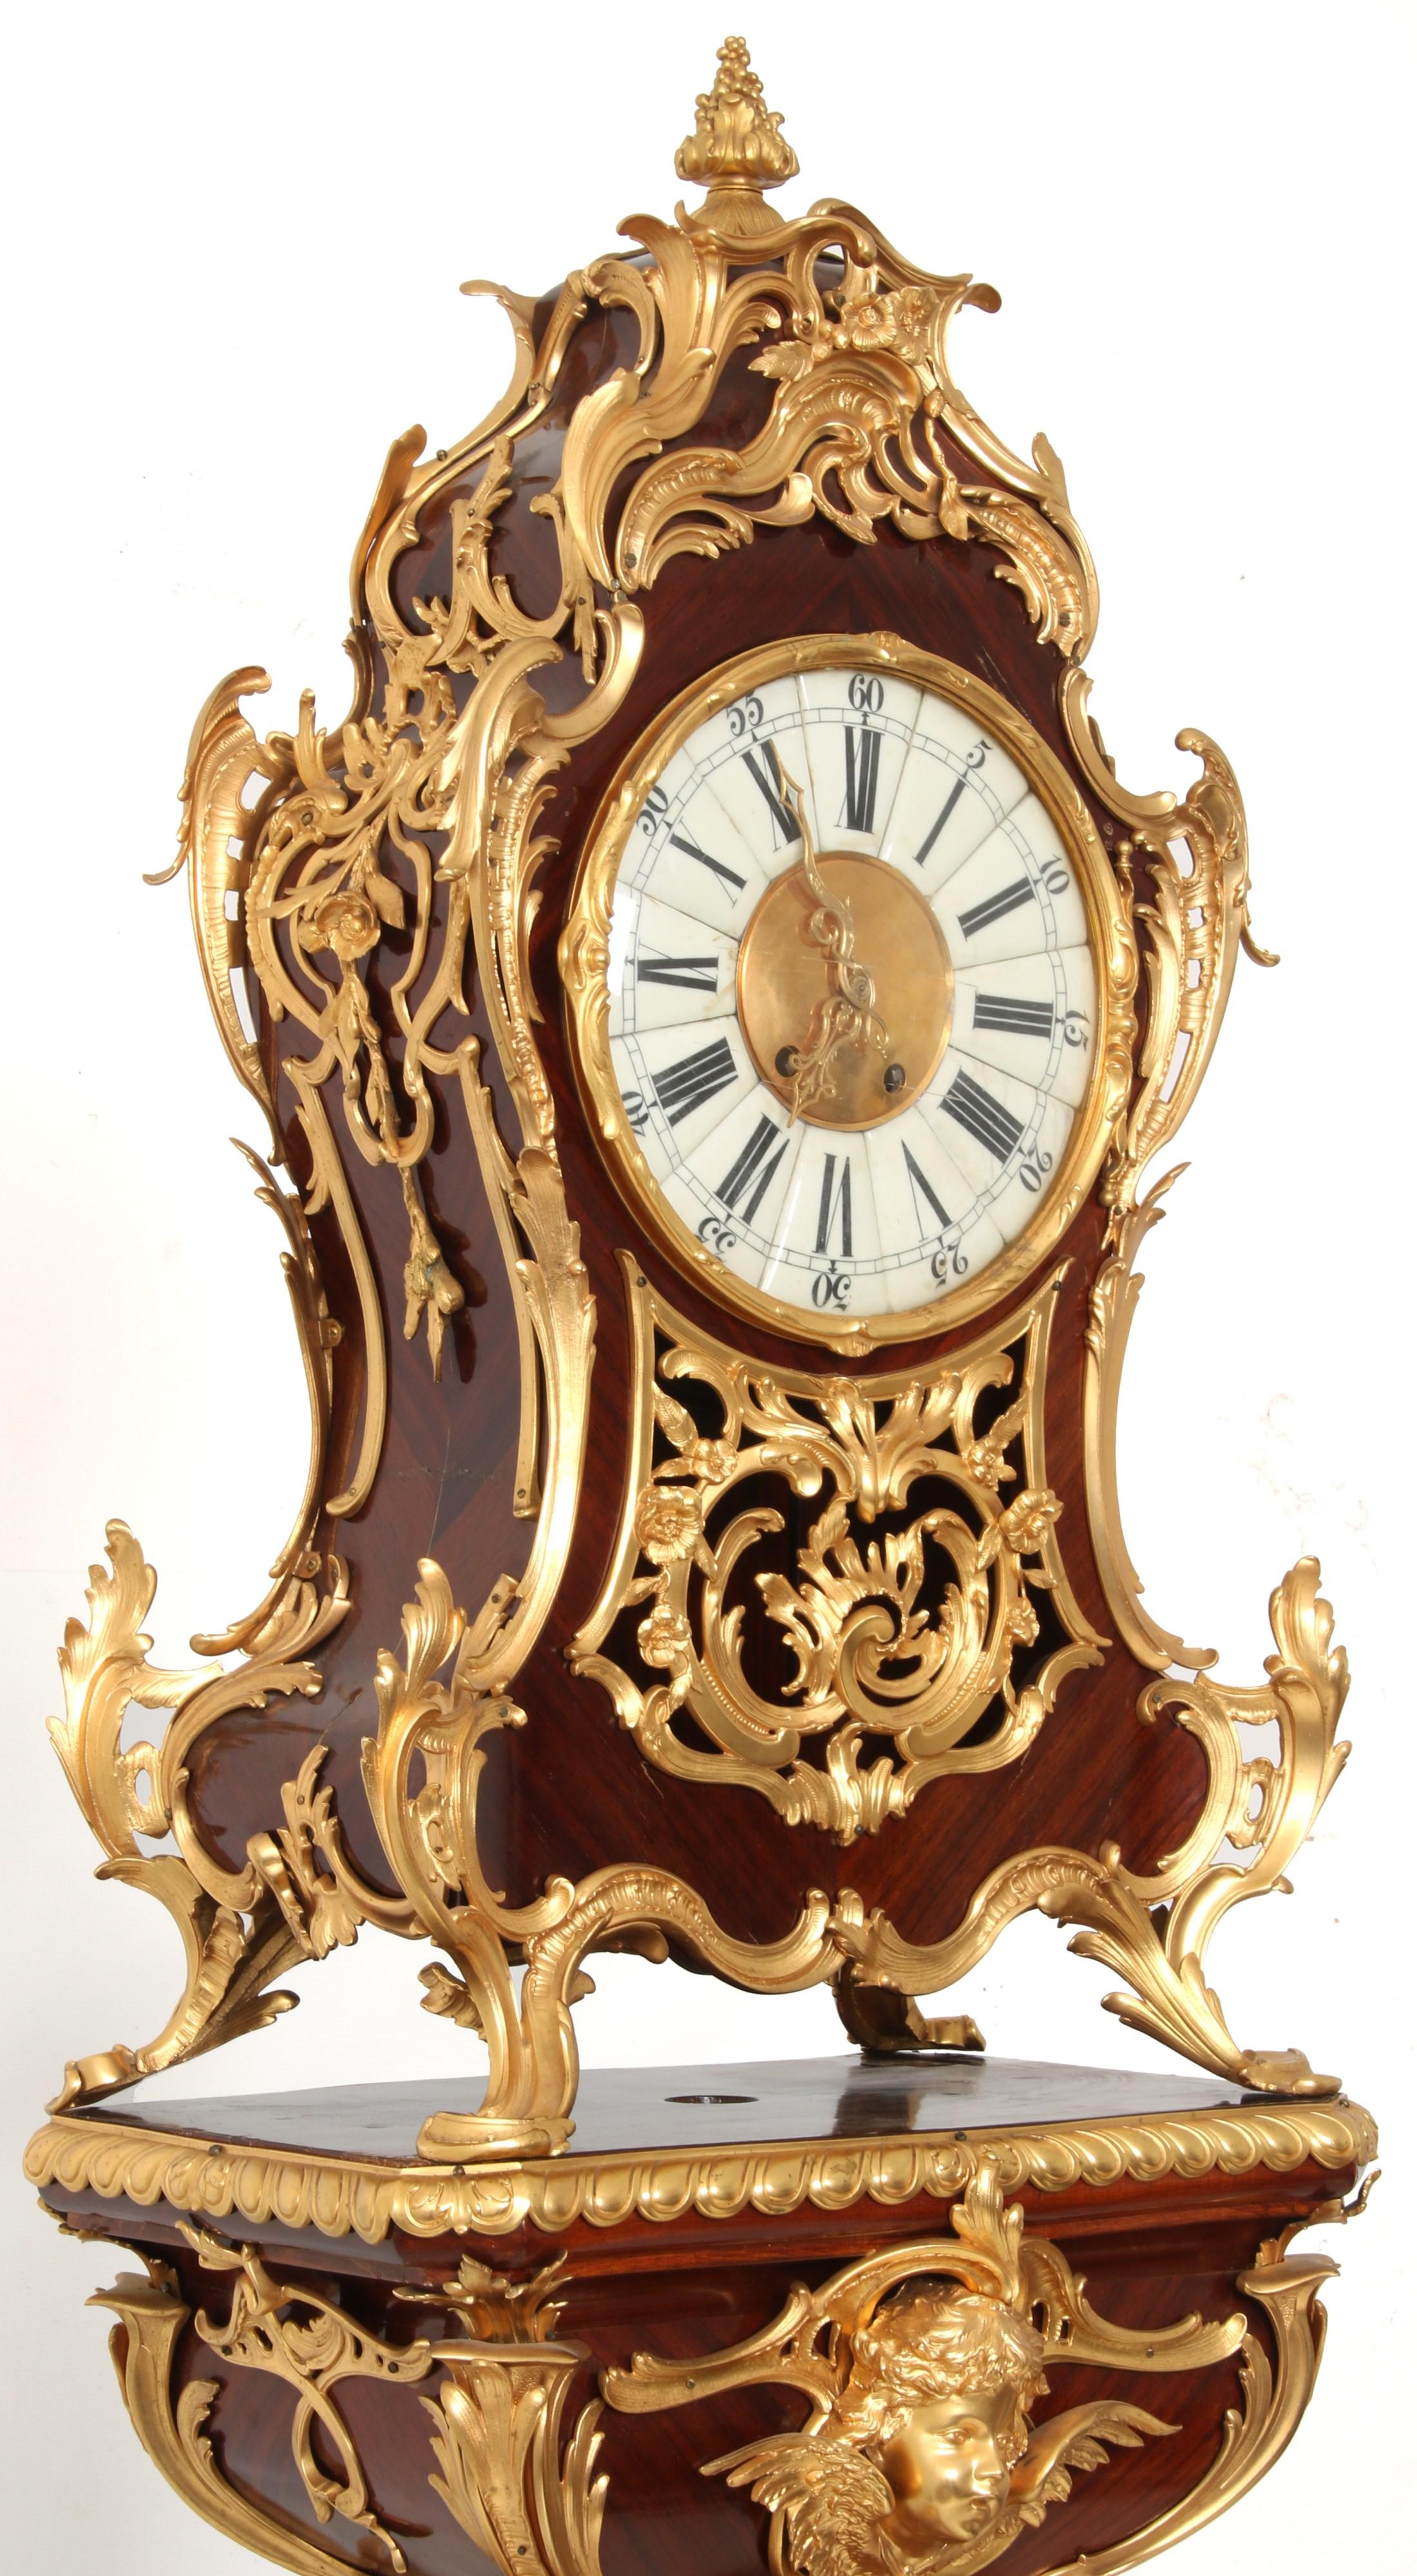 Finest quality palace size French 19th century Louis XV style gilt bronze mounted mahogany clock on pedestal.